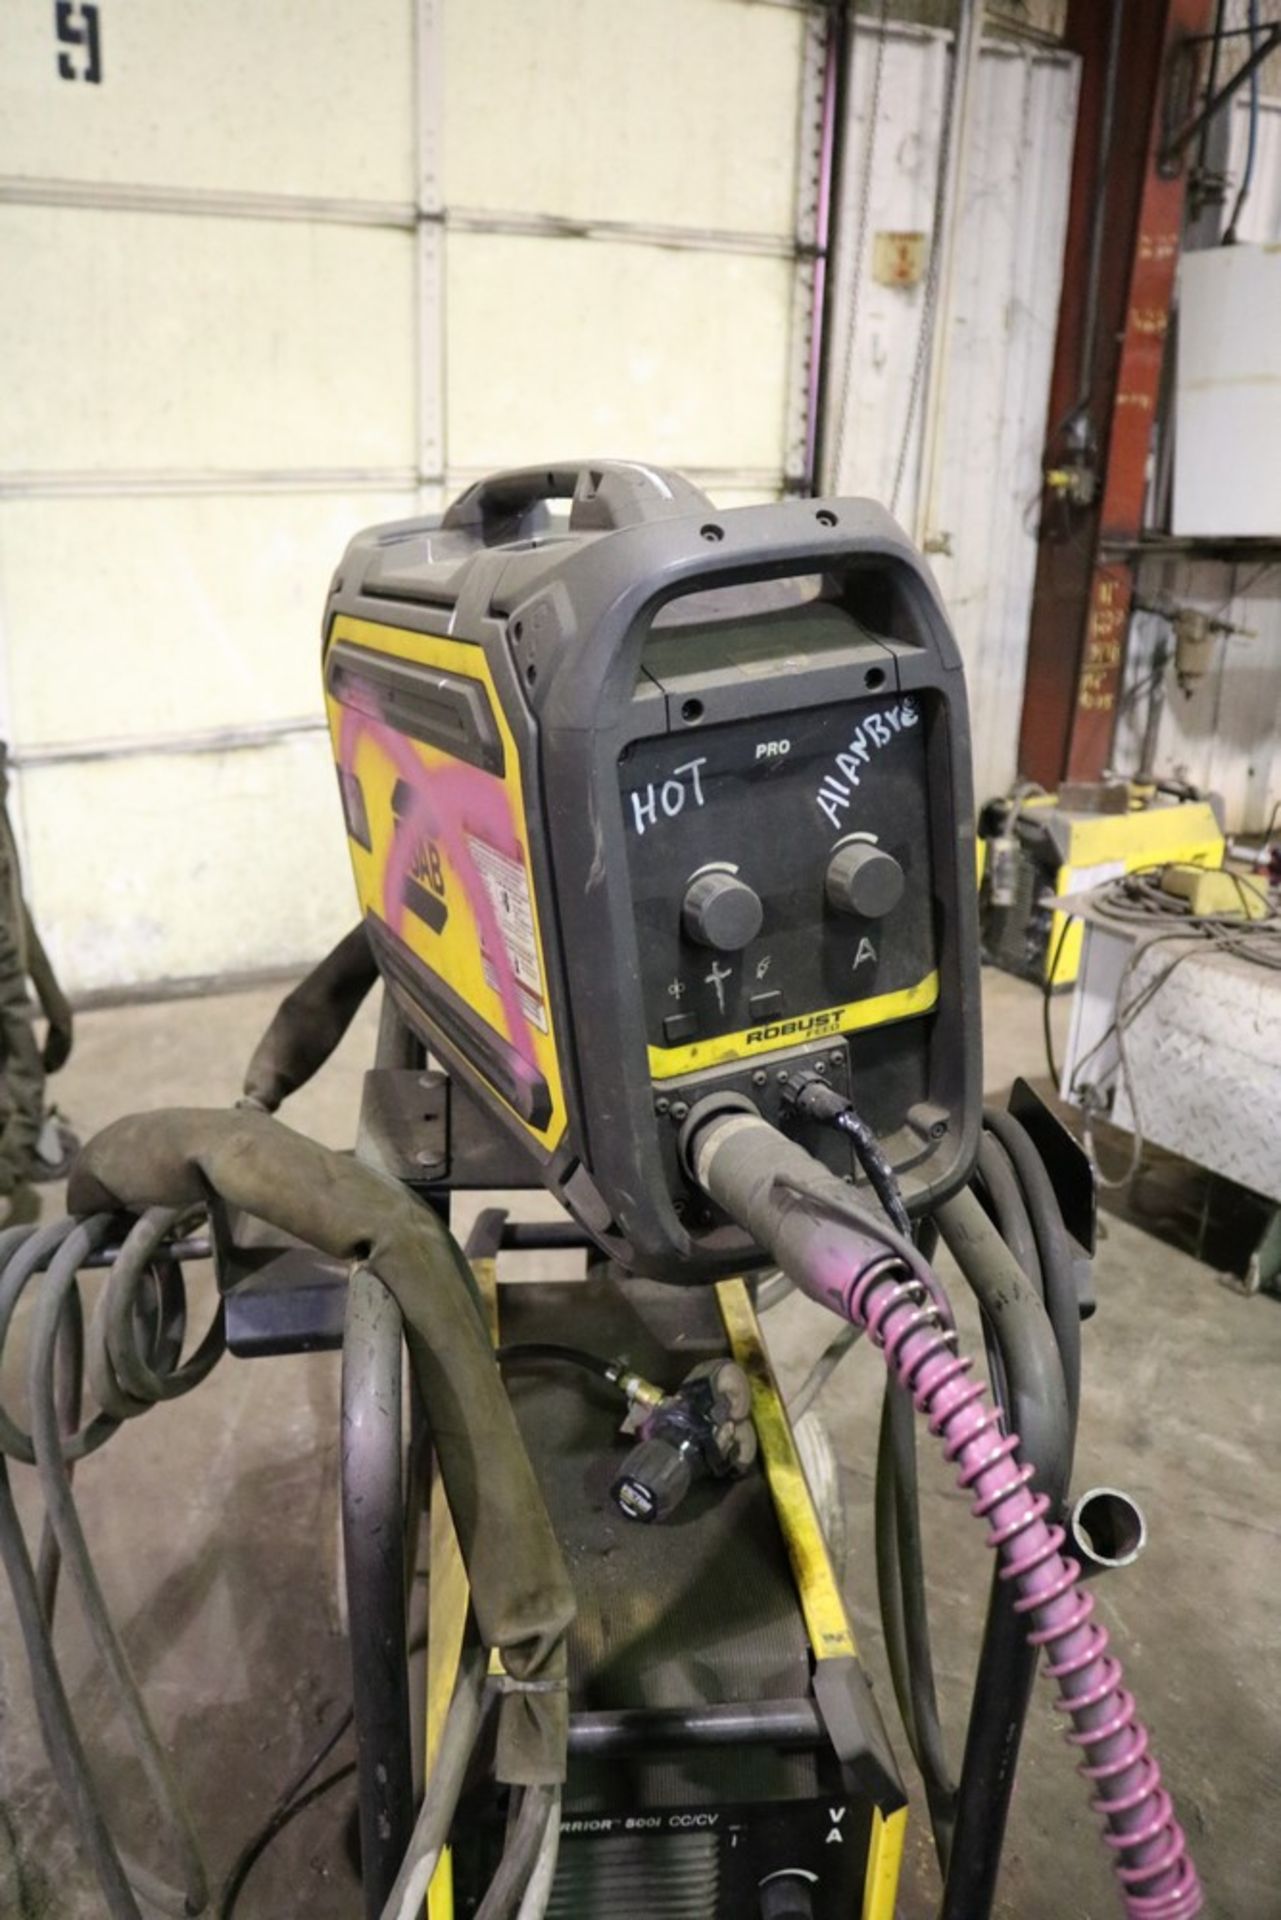 ESAB Warrior 500i Multi Process Welder with Robust Feed Pro Unit - Image 2 of 10